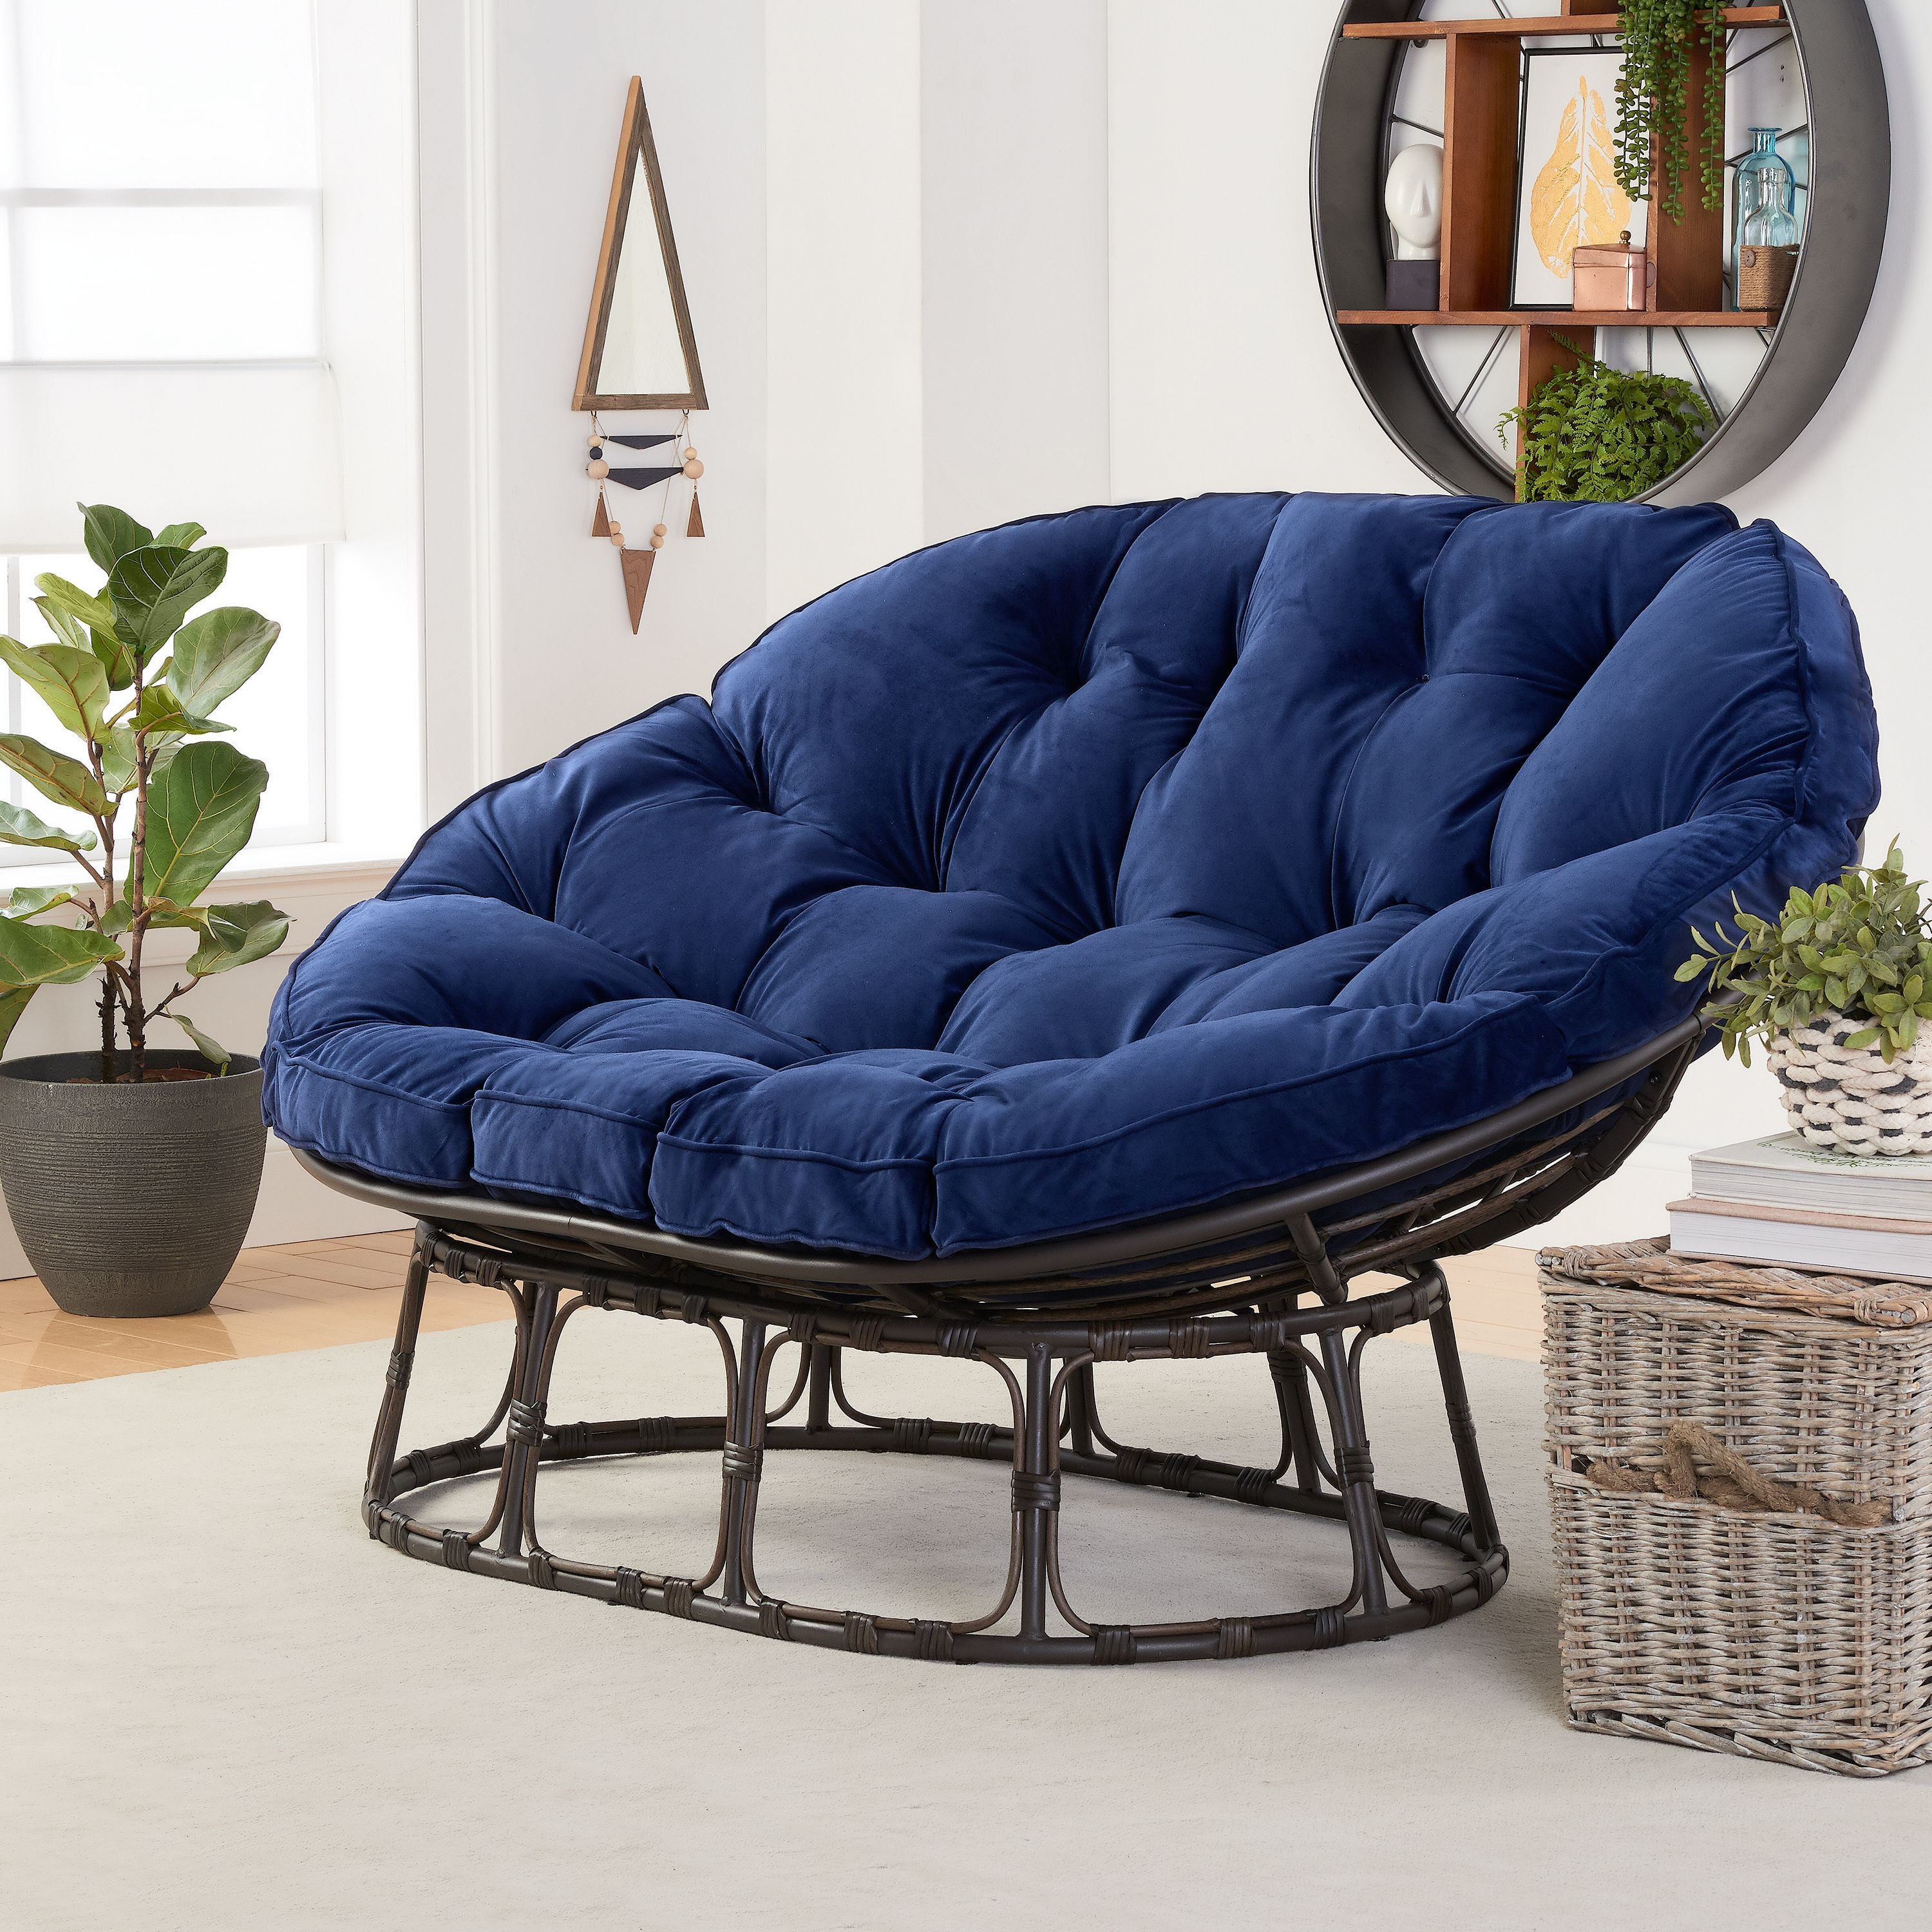 Details about   Papasan Bench With Cushion Fits 2-Persons Home Living Room Dens Furniture 